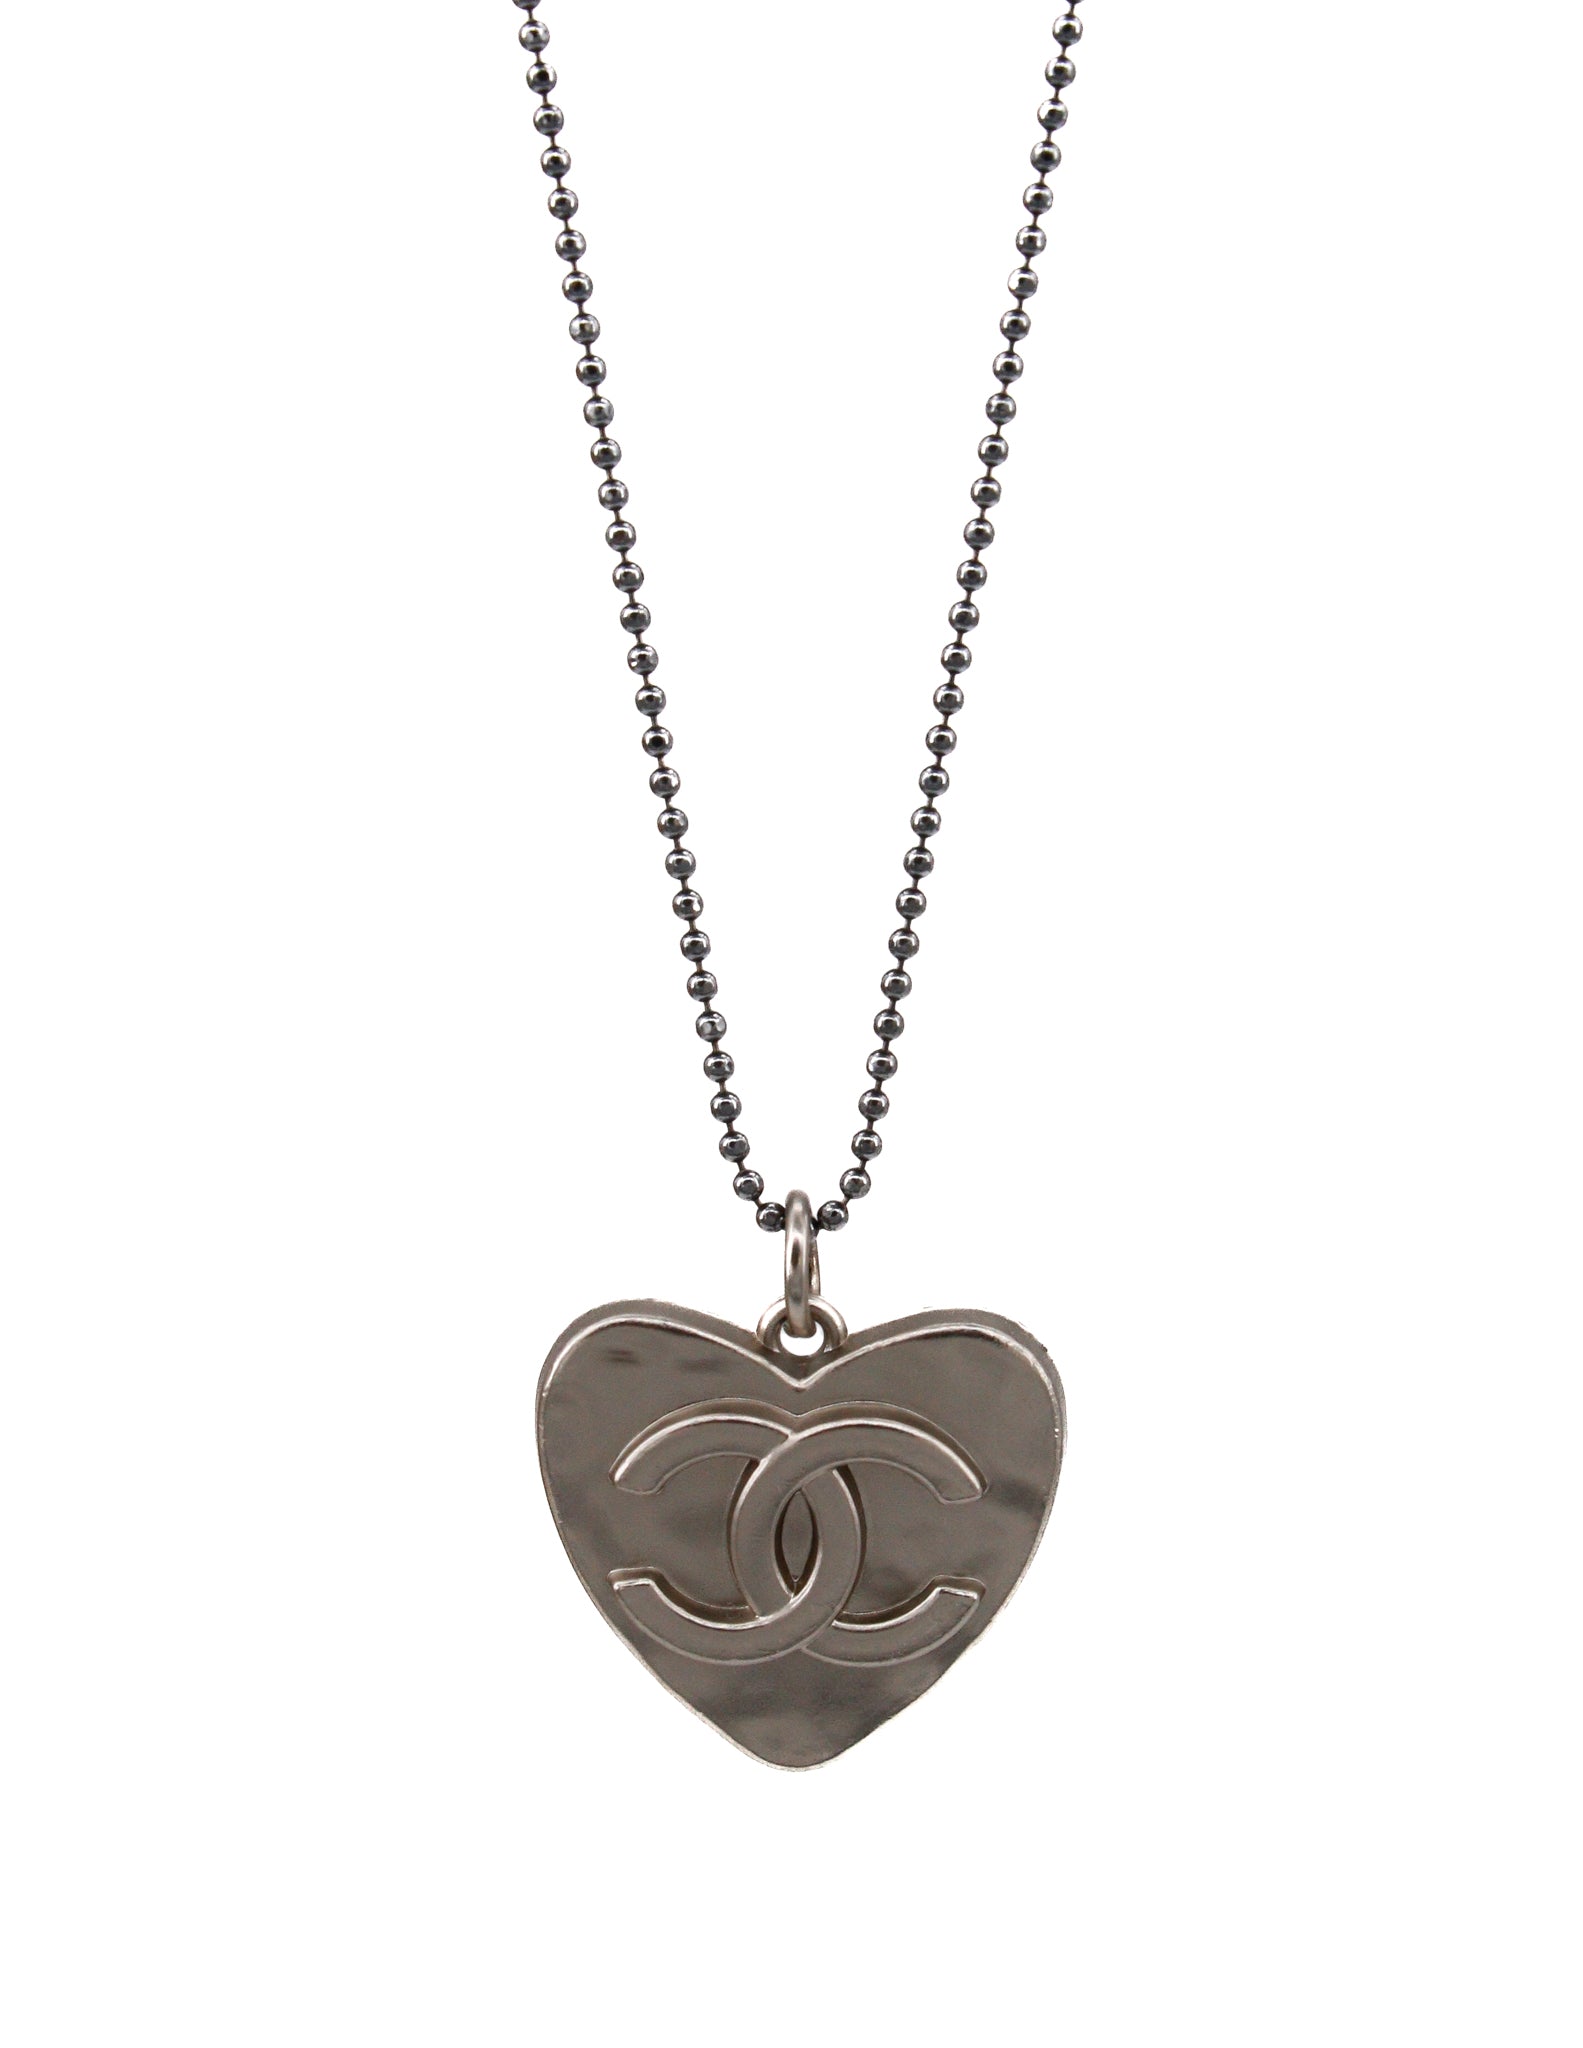 Sterling silver ball chain necklace with a repurposed designer heart pendant